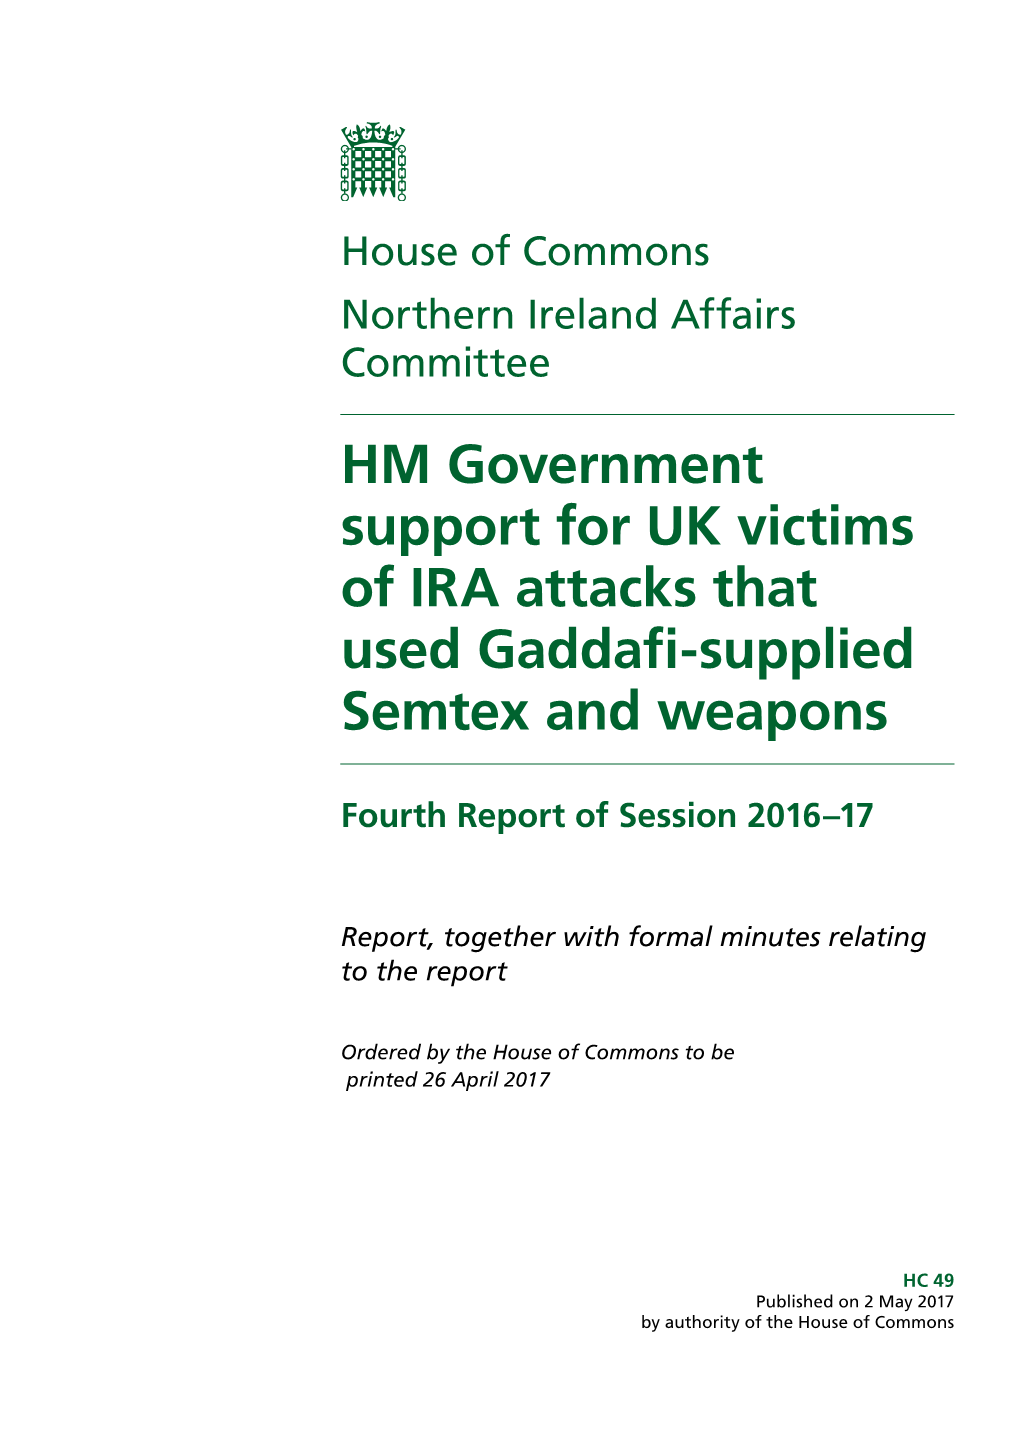 HM Government Support for UK Victims of IRA Attacks That Used Gaddafi-Supplied Semtex and Weapons